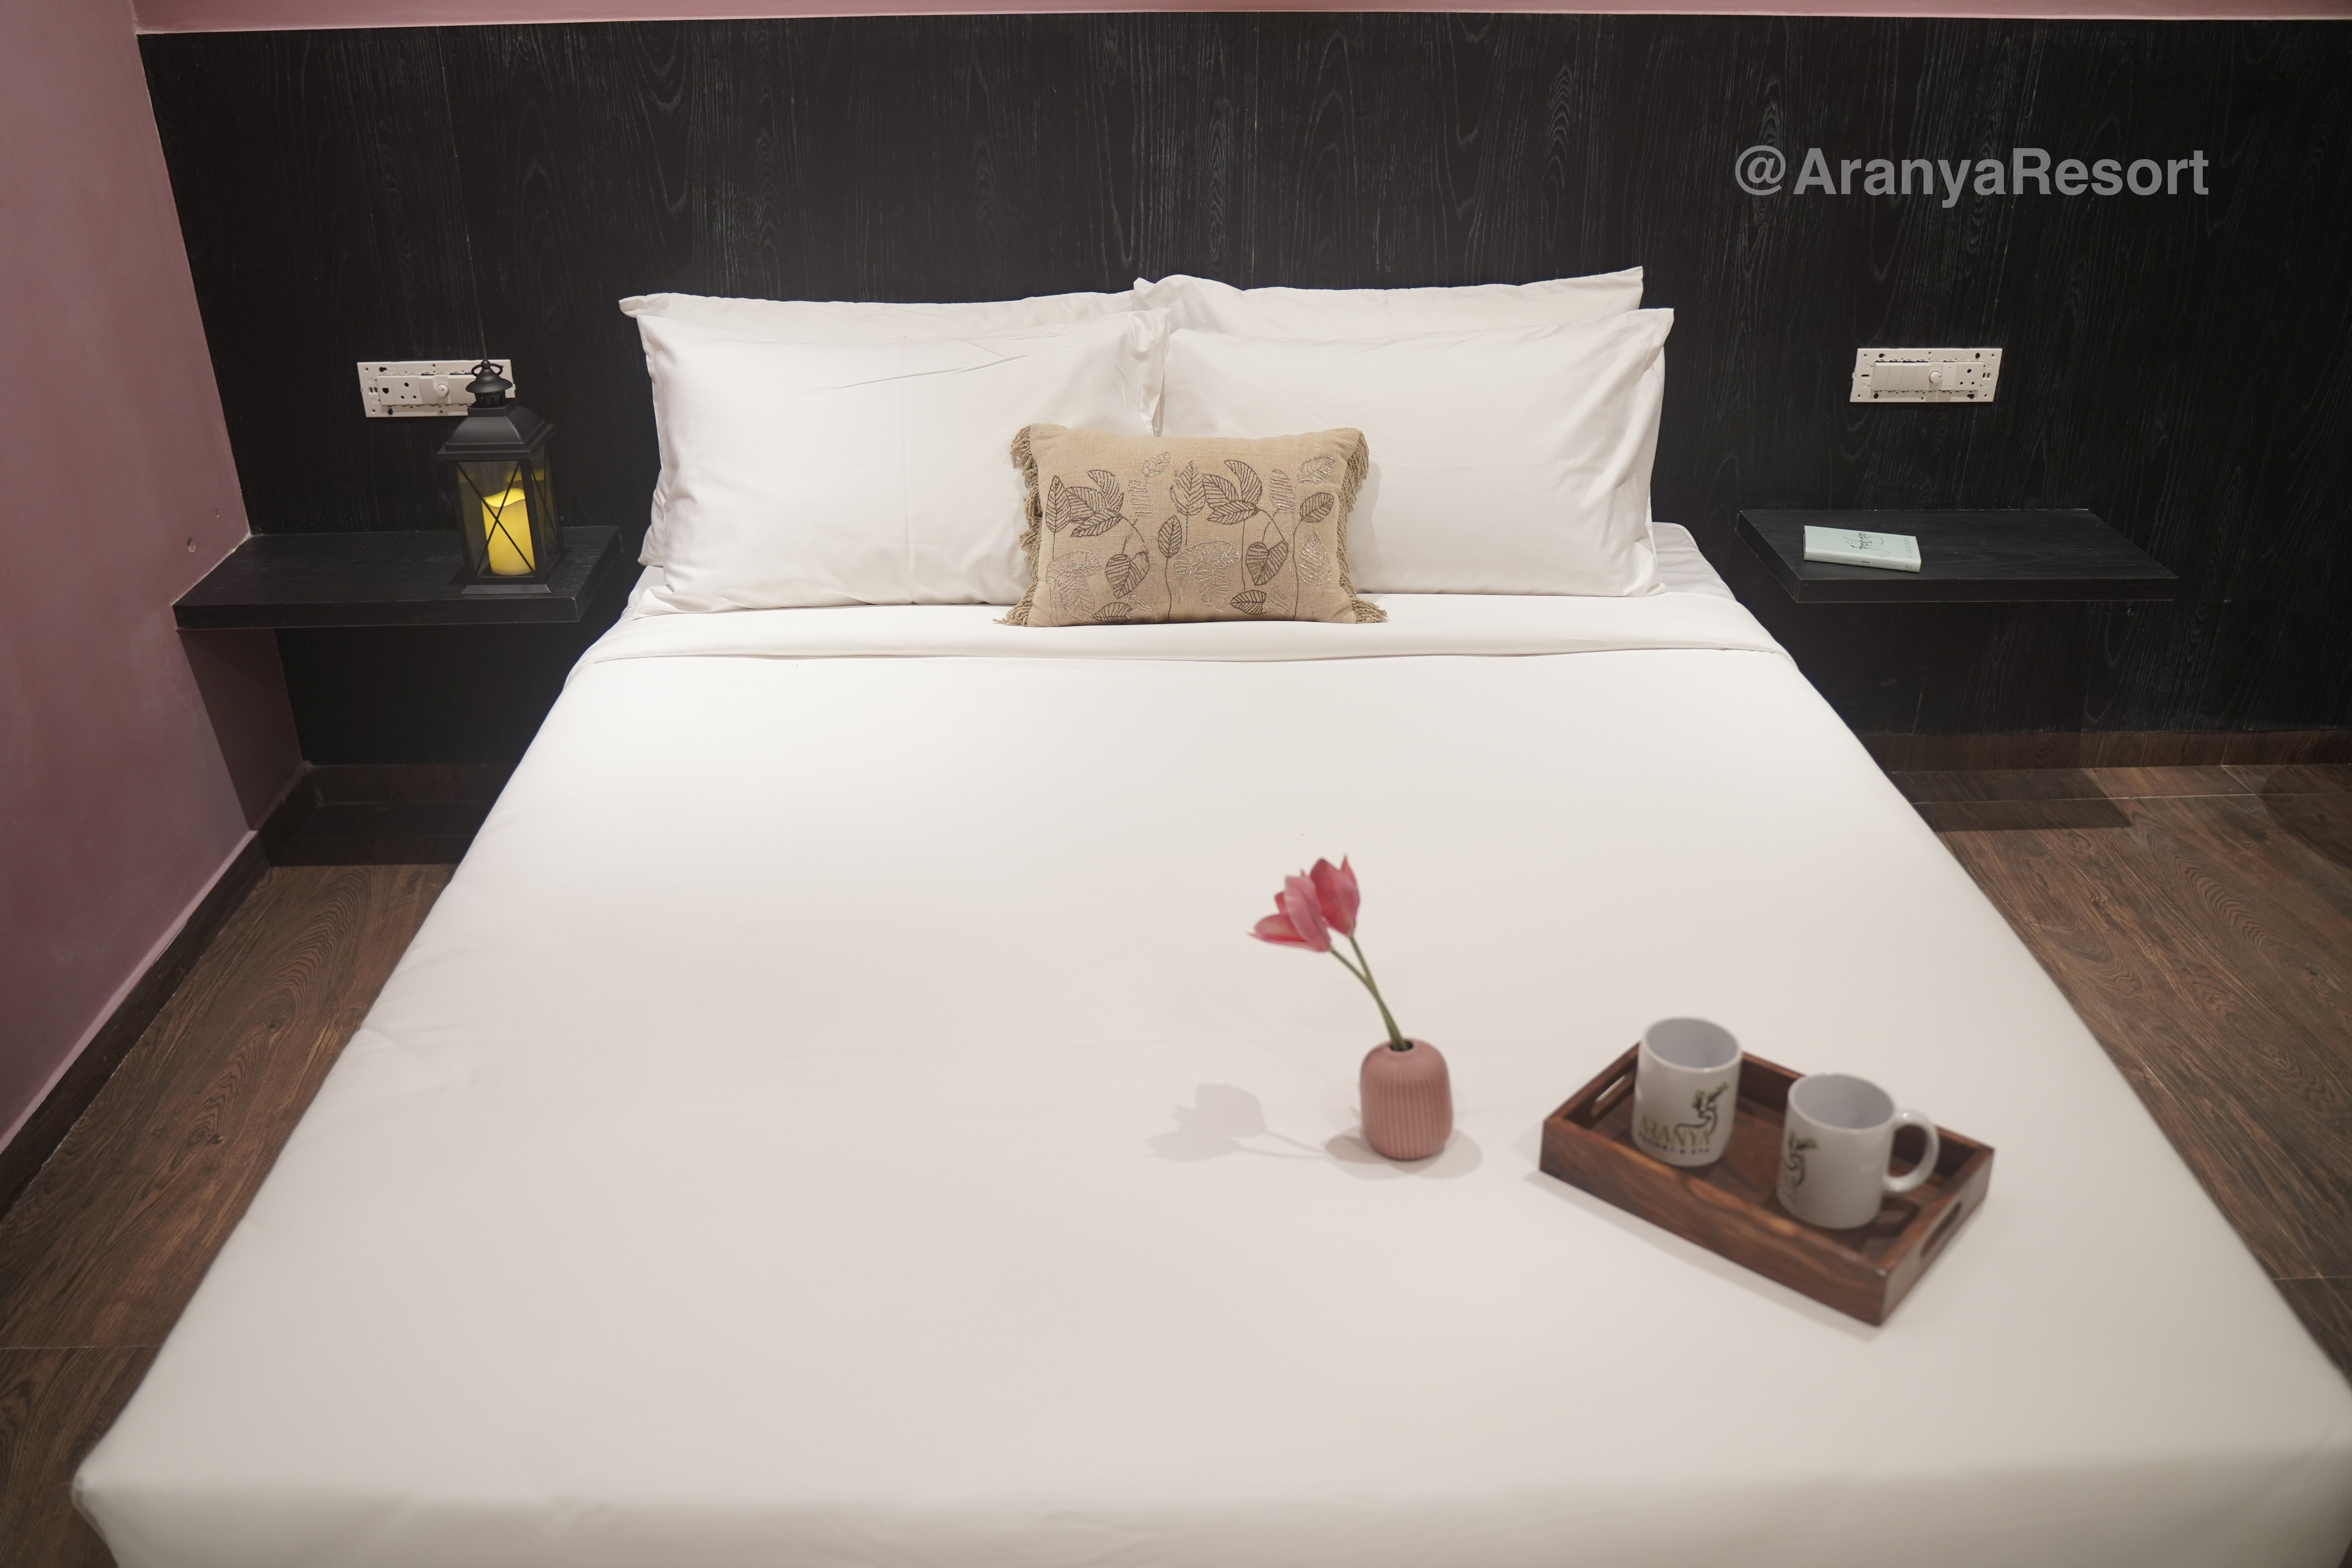 a bed with a tray of coffee cups and a flower on it